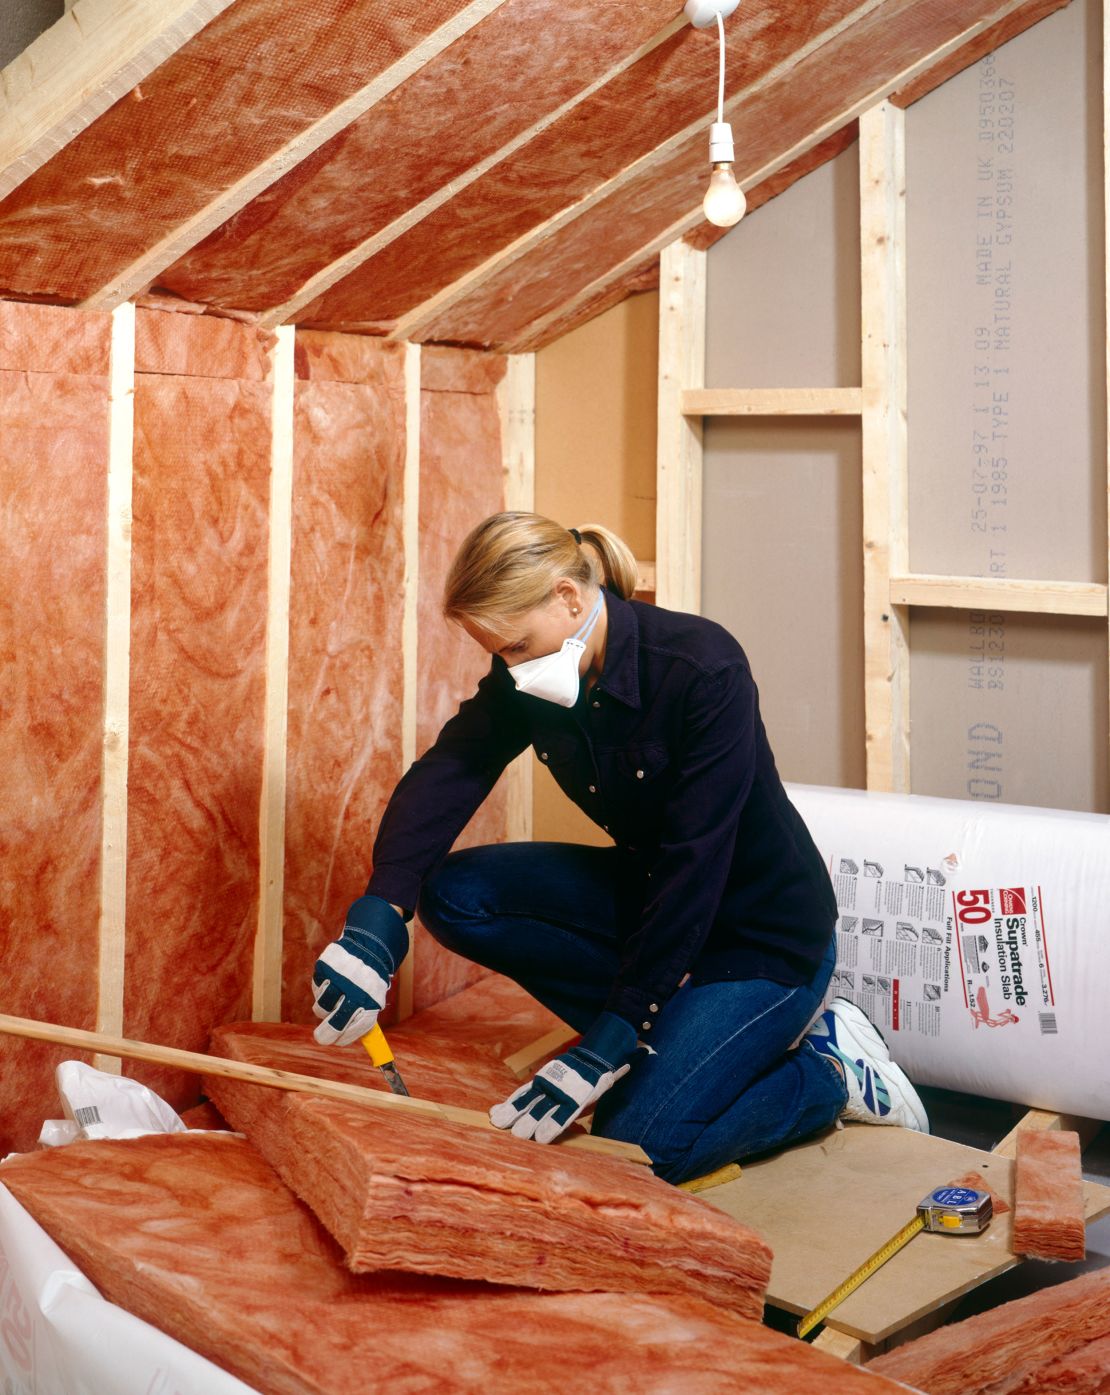 Around one-third of all heat lost in an uninsulated home escapes through the walls.